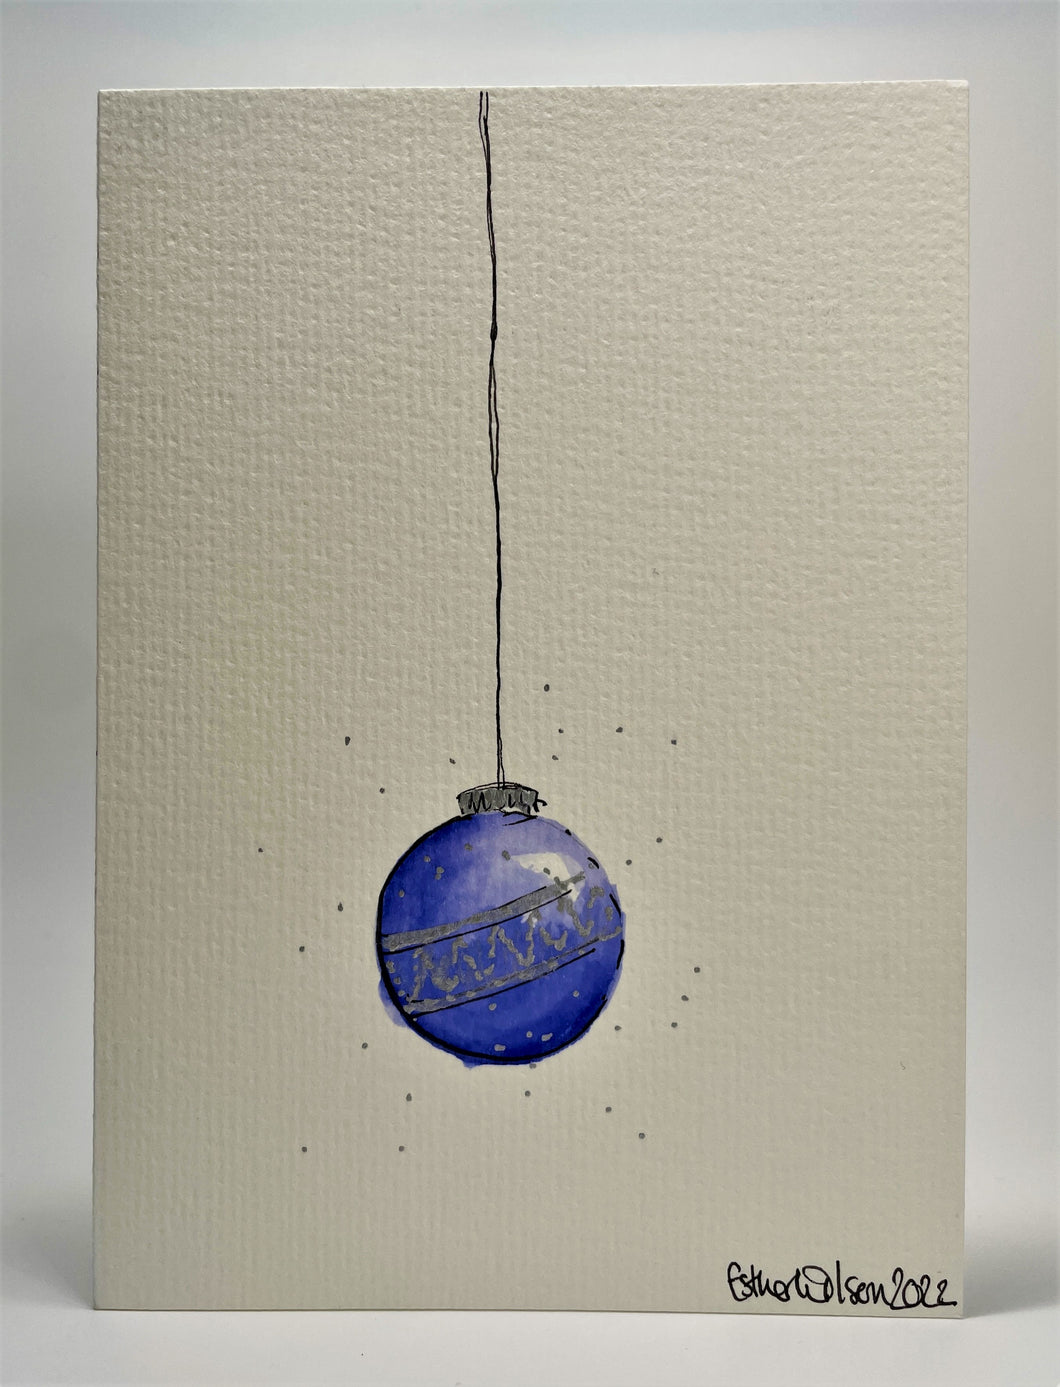 Indigo Blue and Silver Bauble - Hand Painted Christmas Card